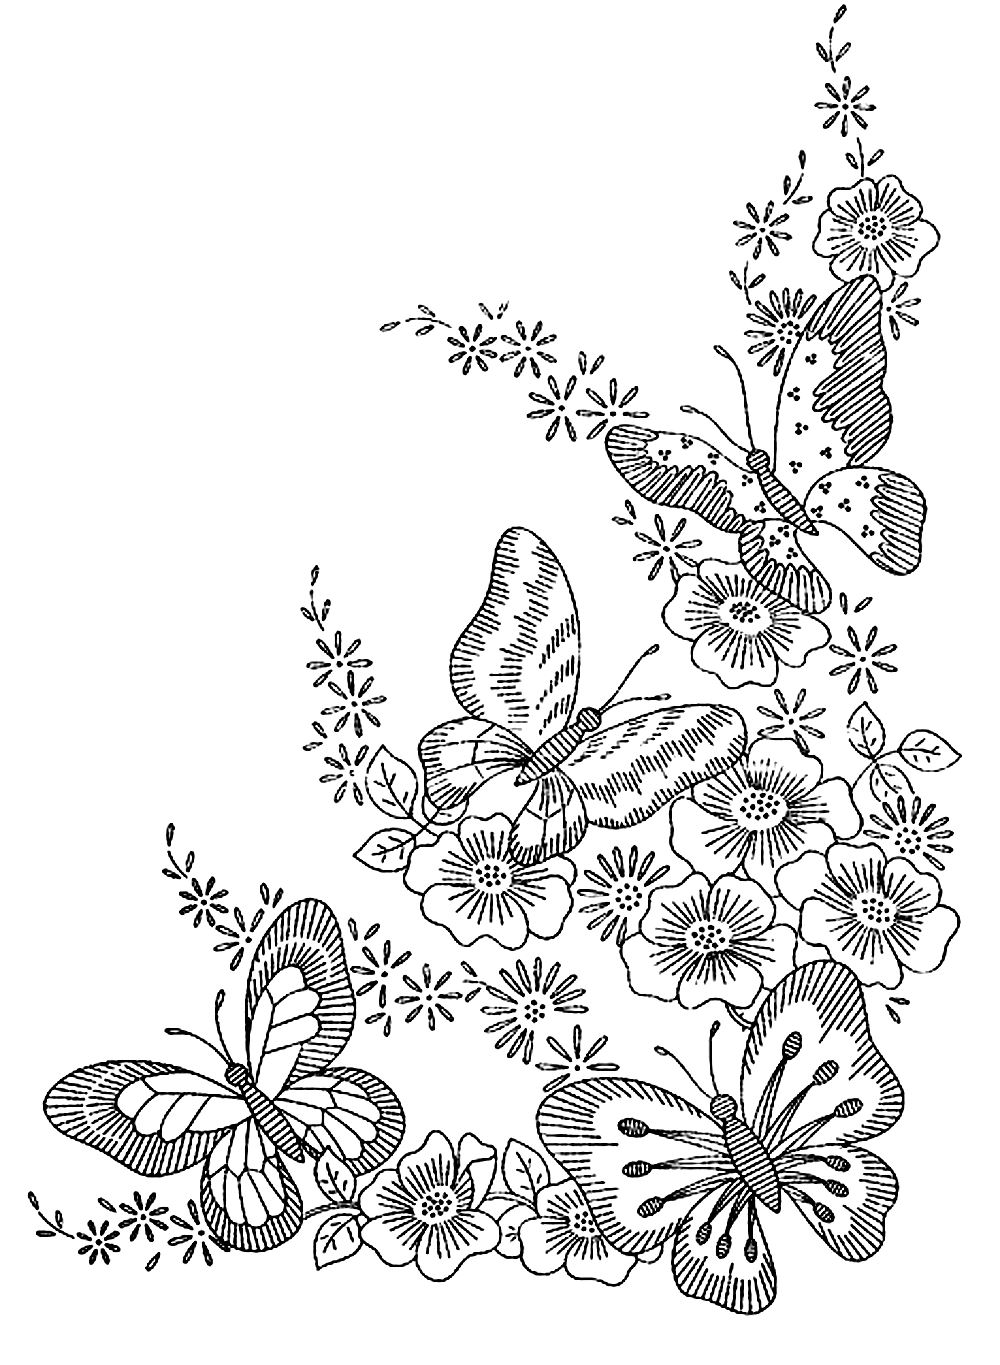 Insects - Coloring pages for adults : coloring-adult-difficult-butterflies